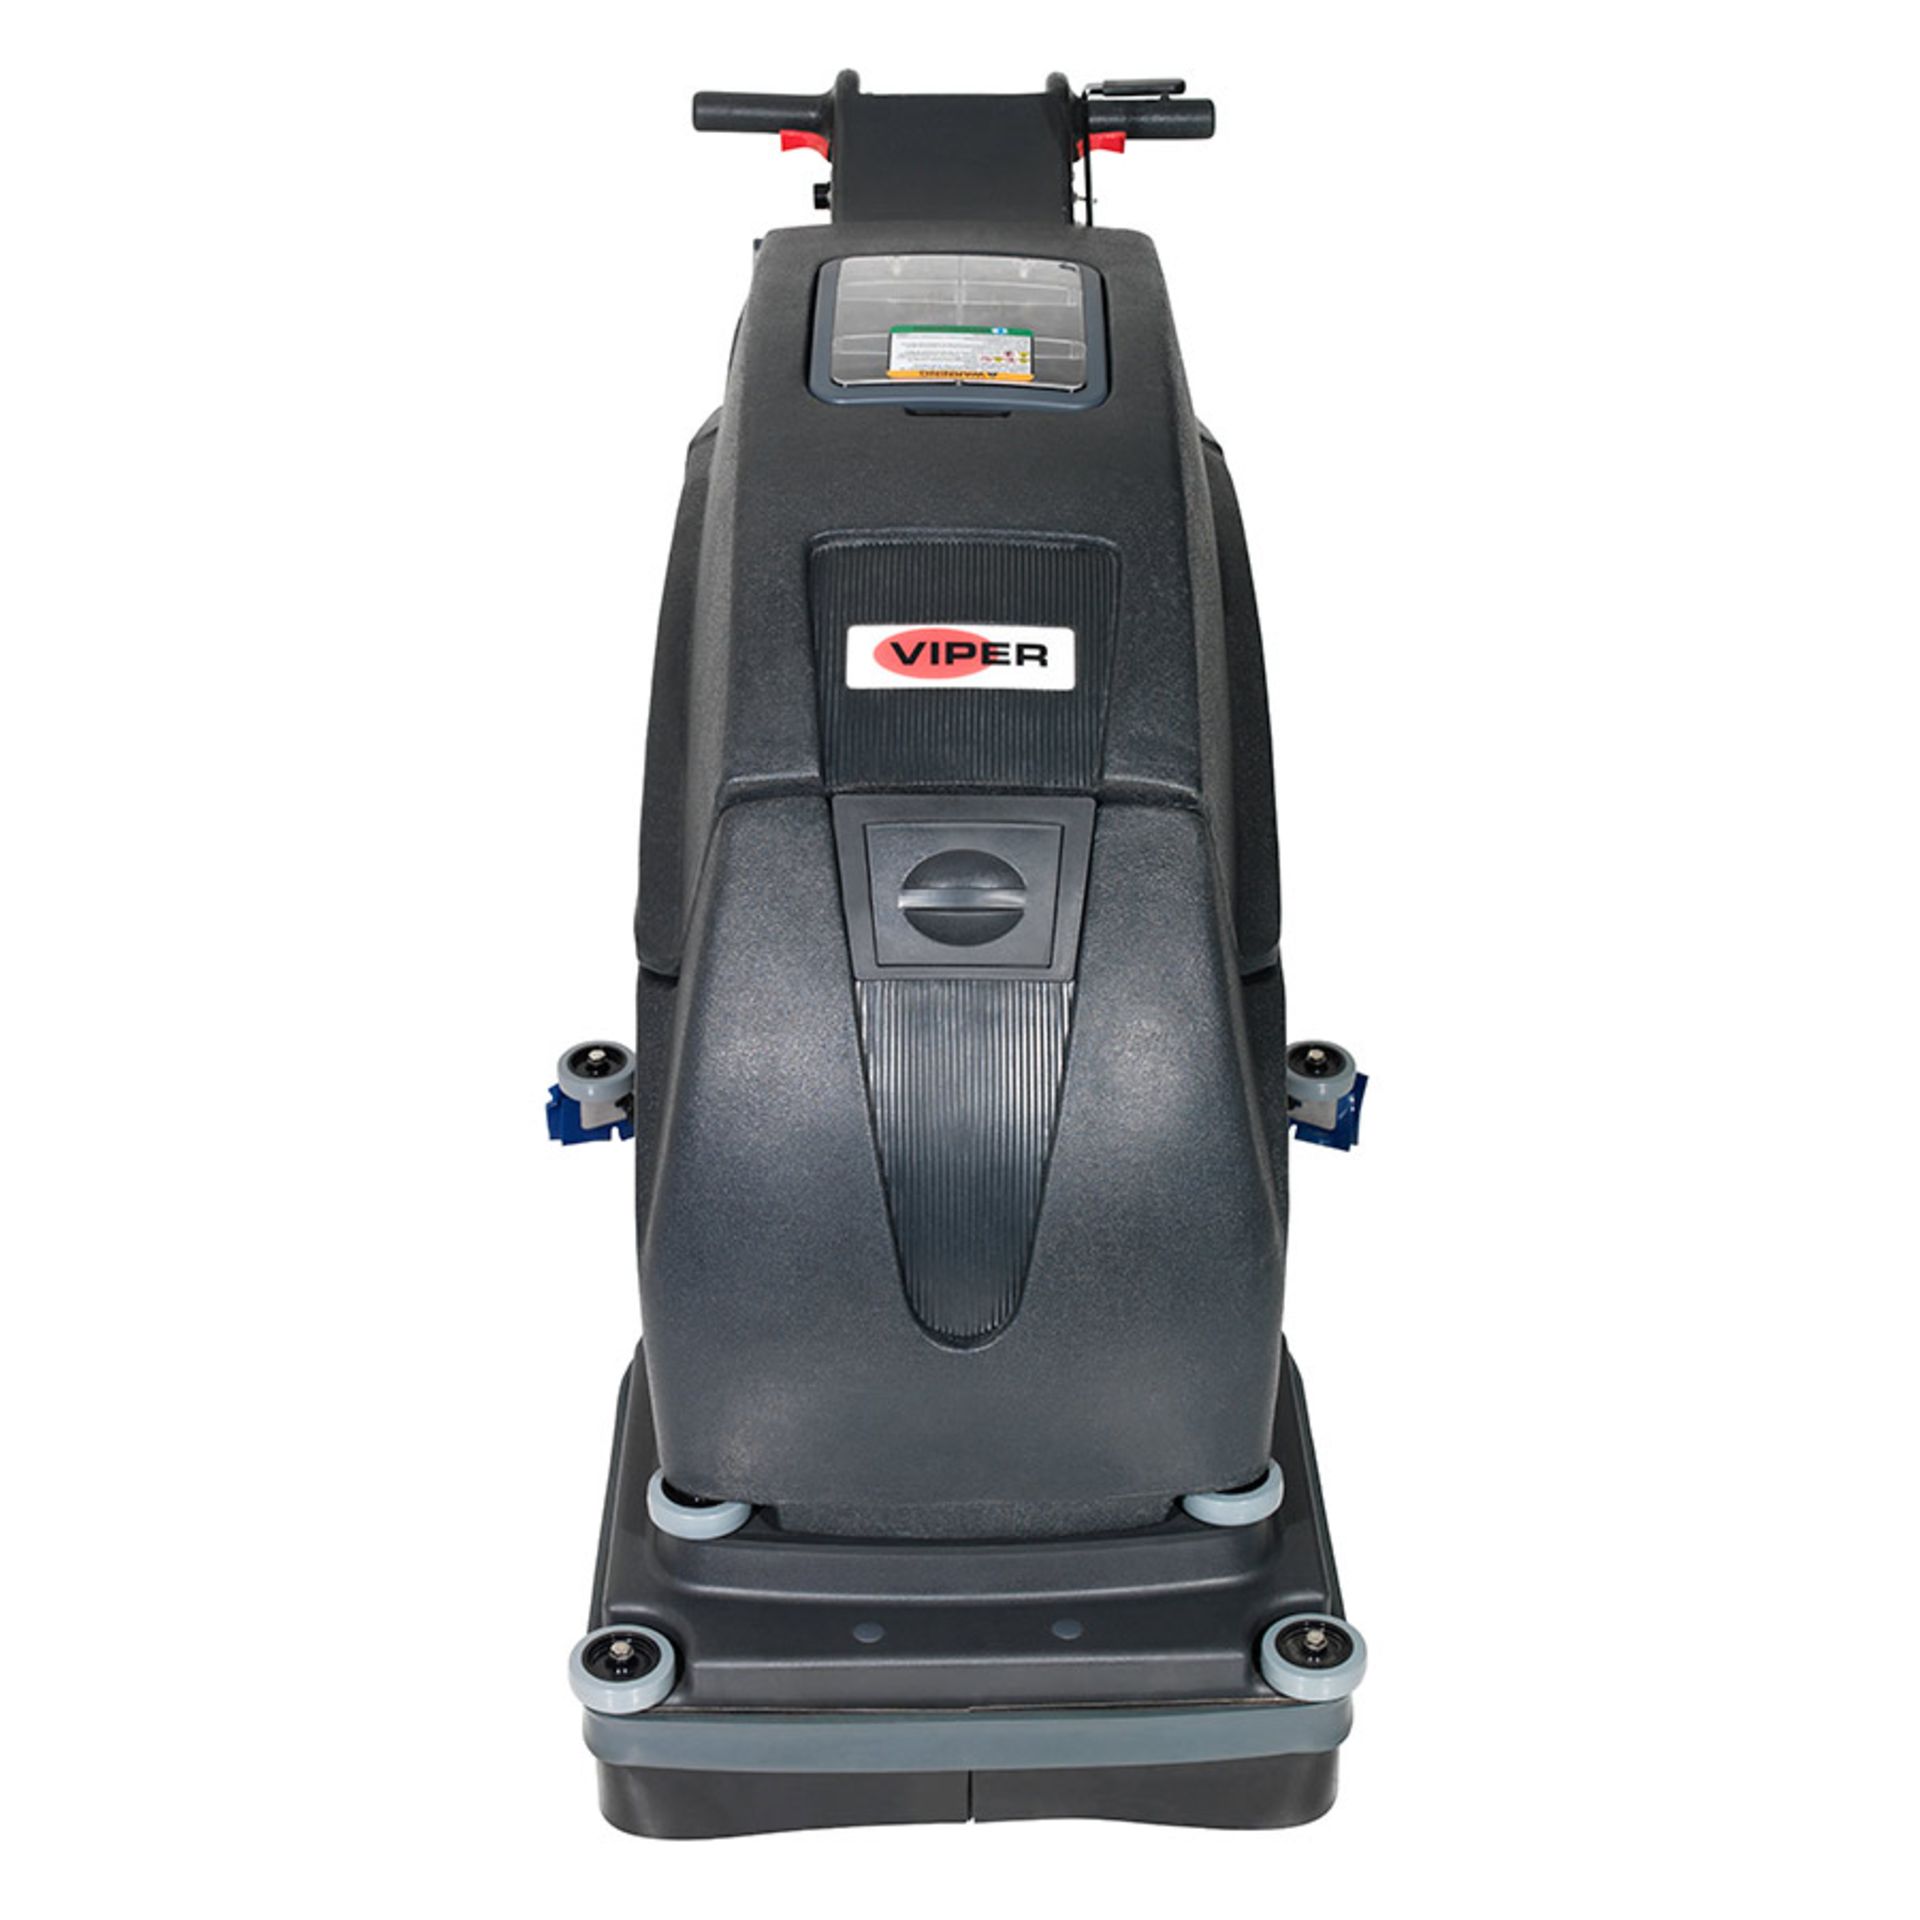 Viper Fang 20HD Walk-behind scrubber dryer. Transaxle drive system.  Light and easy to manoeuvre. - Bild 2 aus 5